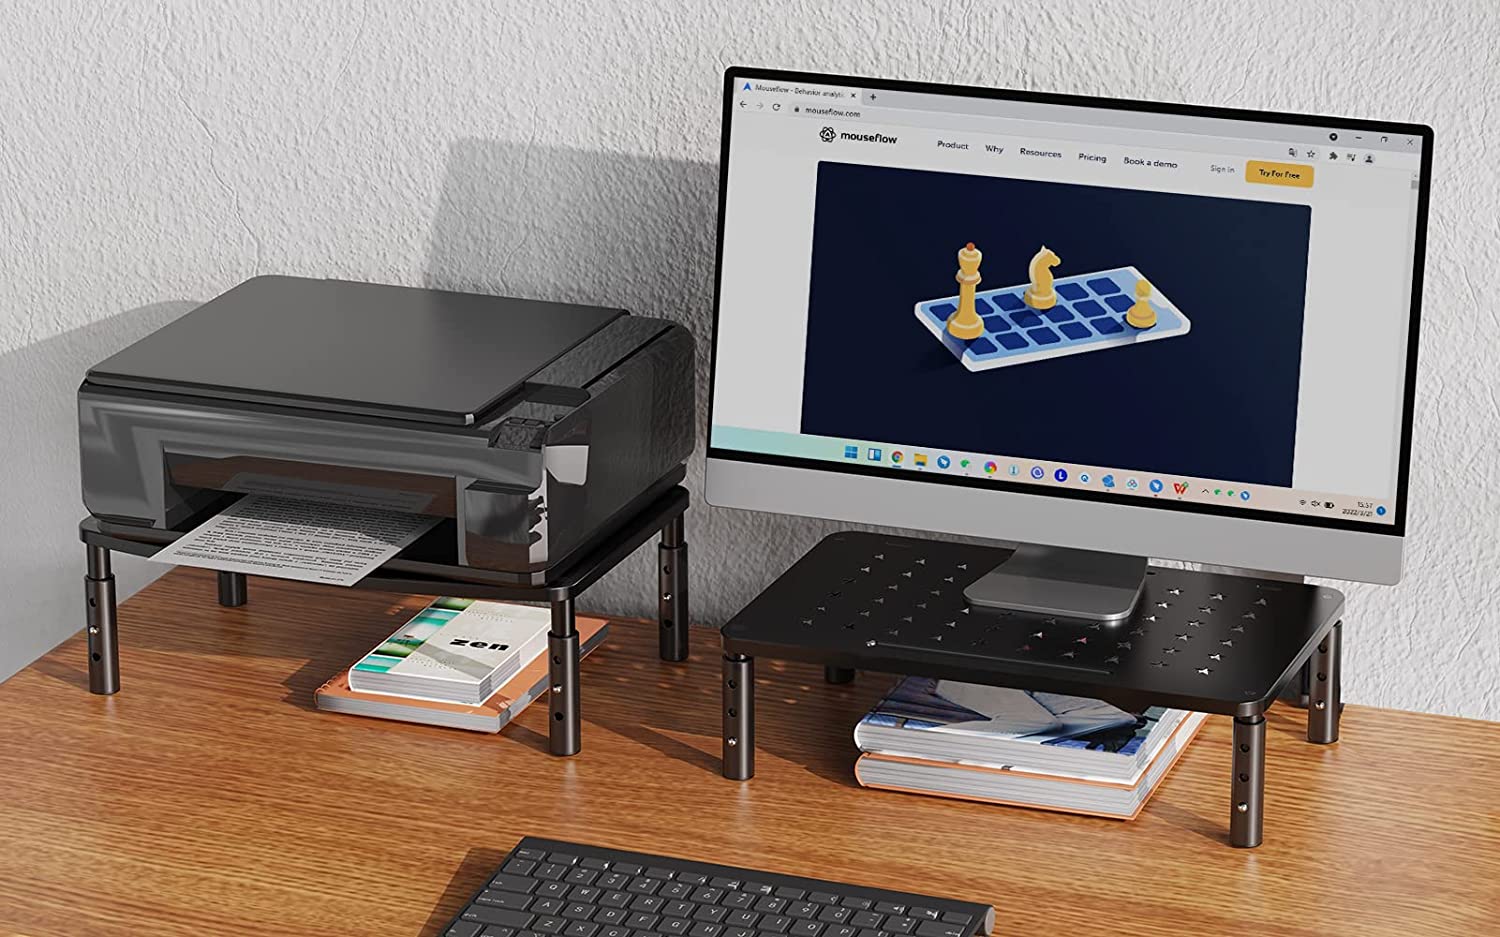 Zimilar 2 Pack monitor stand for computer monitor makes your desk get organized